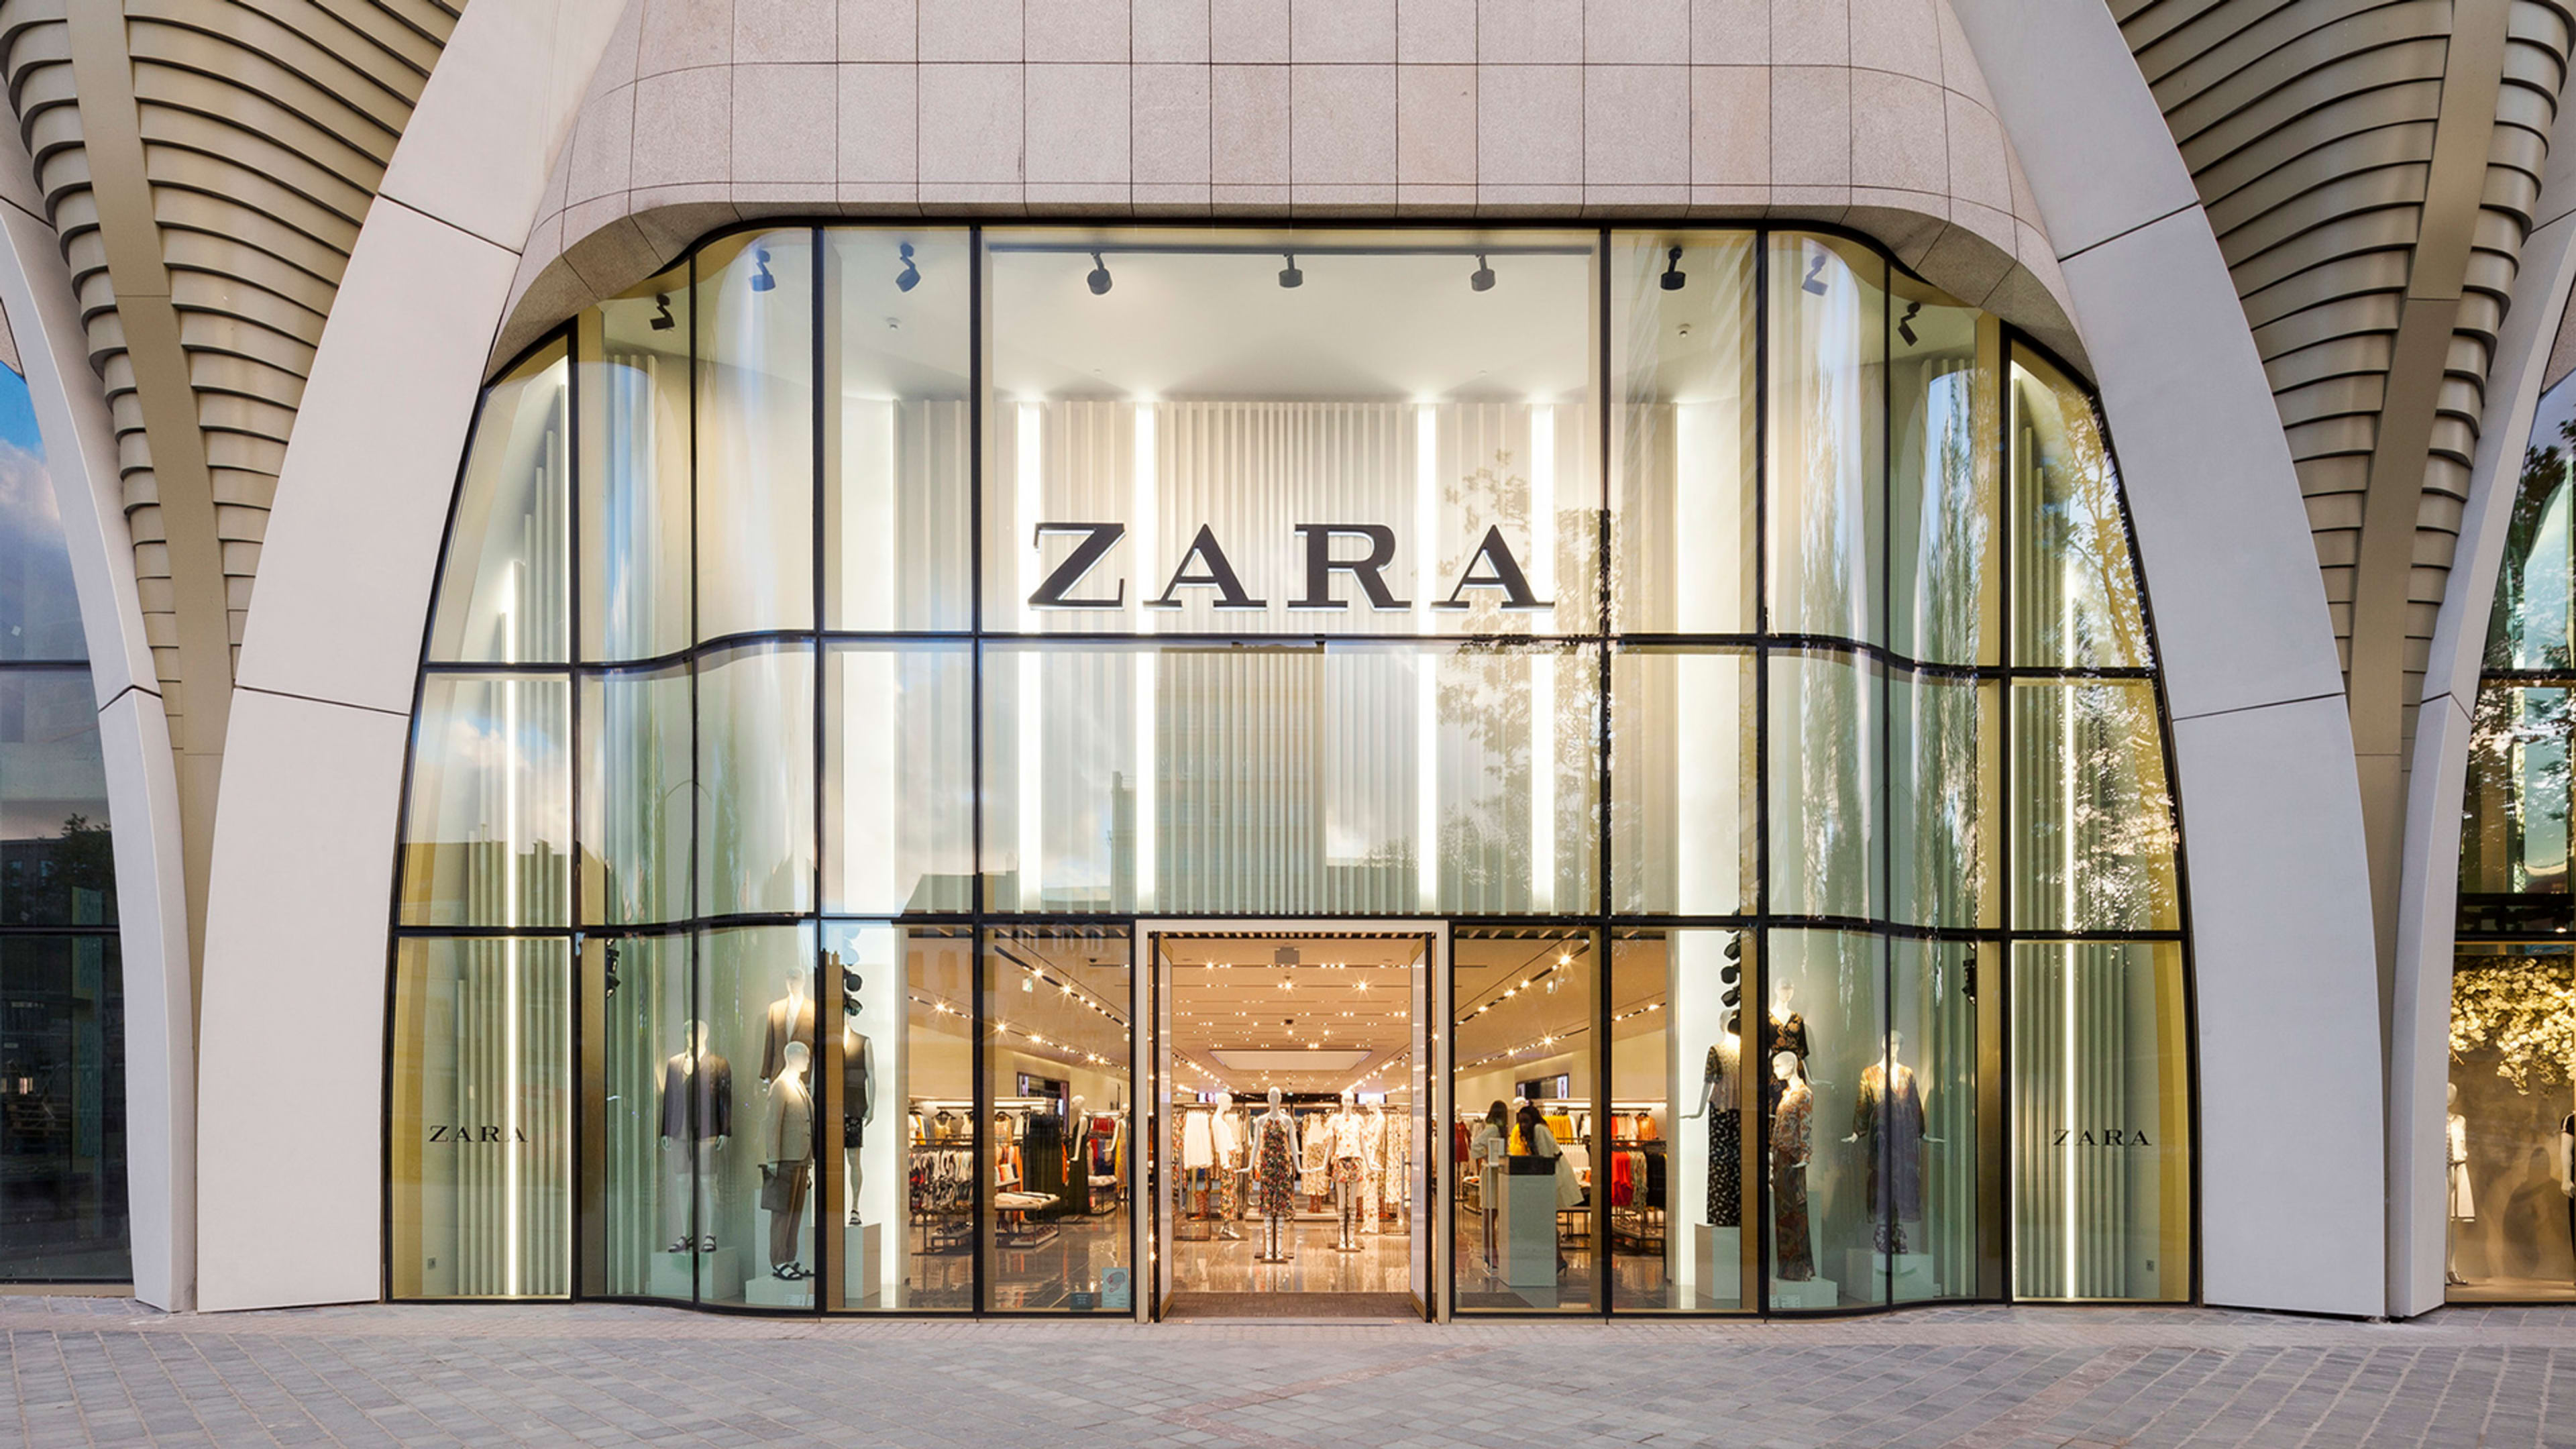 Zara built a $20B empire on fast fashion. Now it needs to slow down